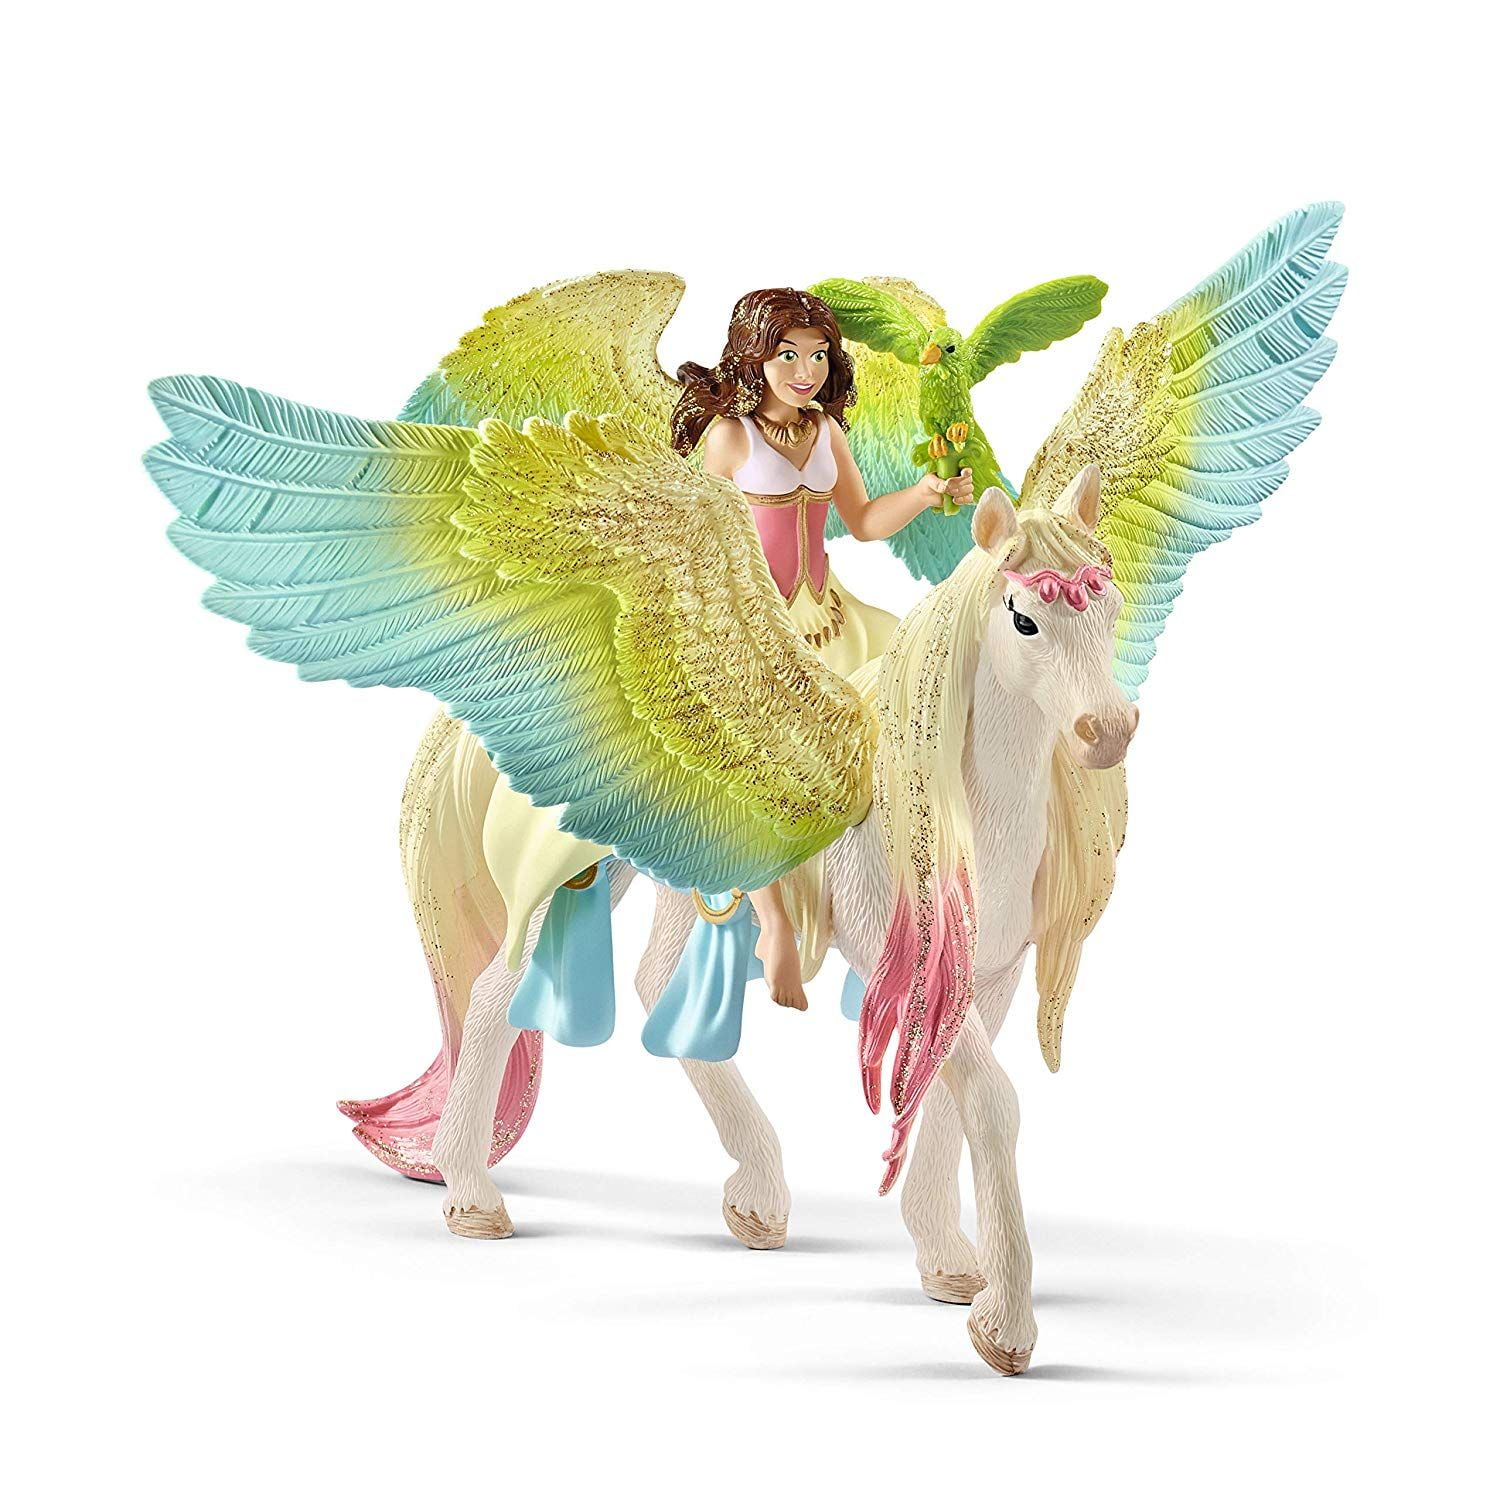 Cake Topper Dino/UnicornThemed Nursery/Party Decor Pegasus Flying Horse Planter & Air Plant -Unique Gift Glam Home or Office Plant Stand